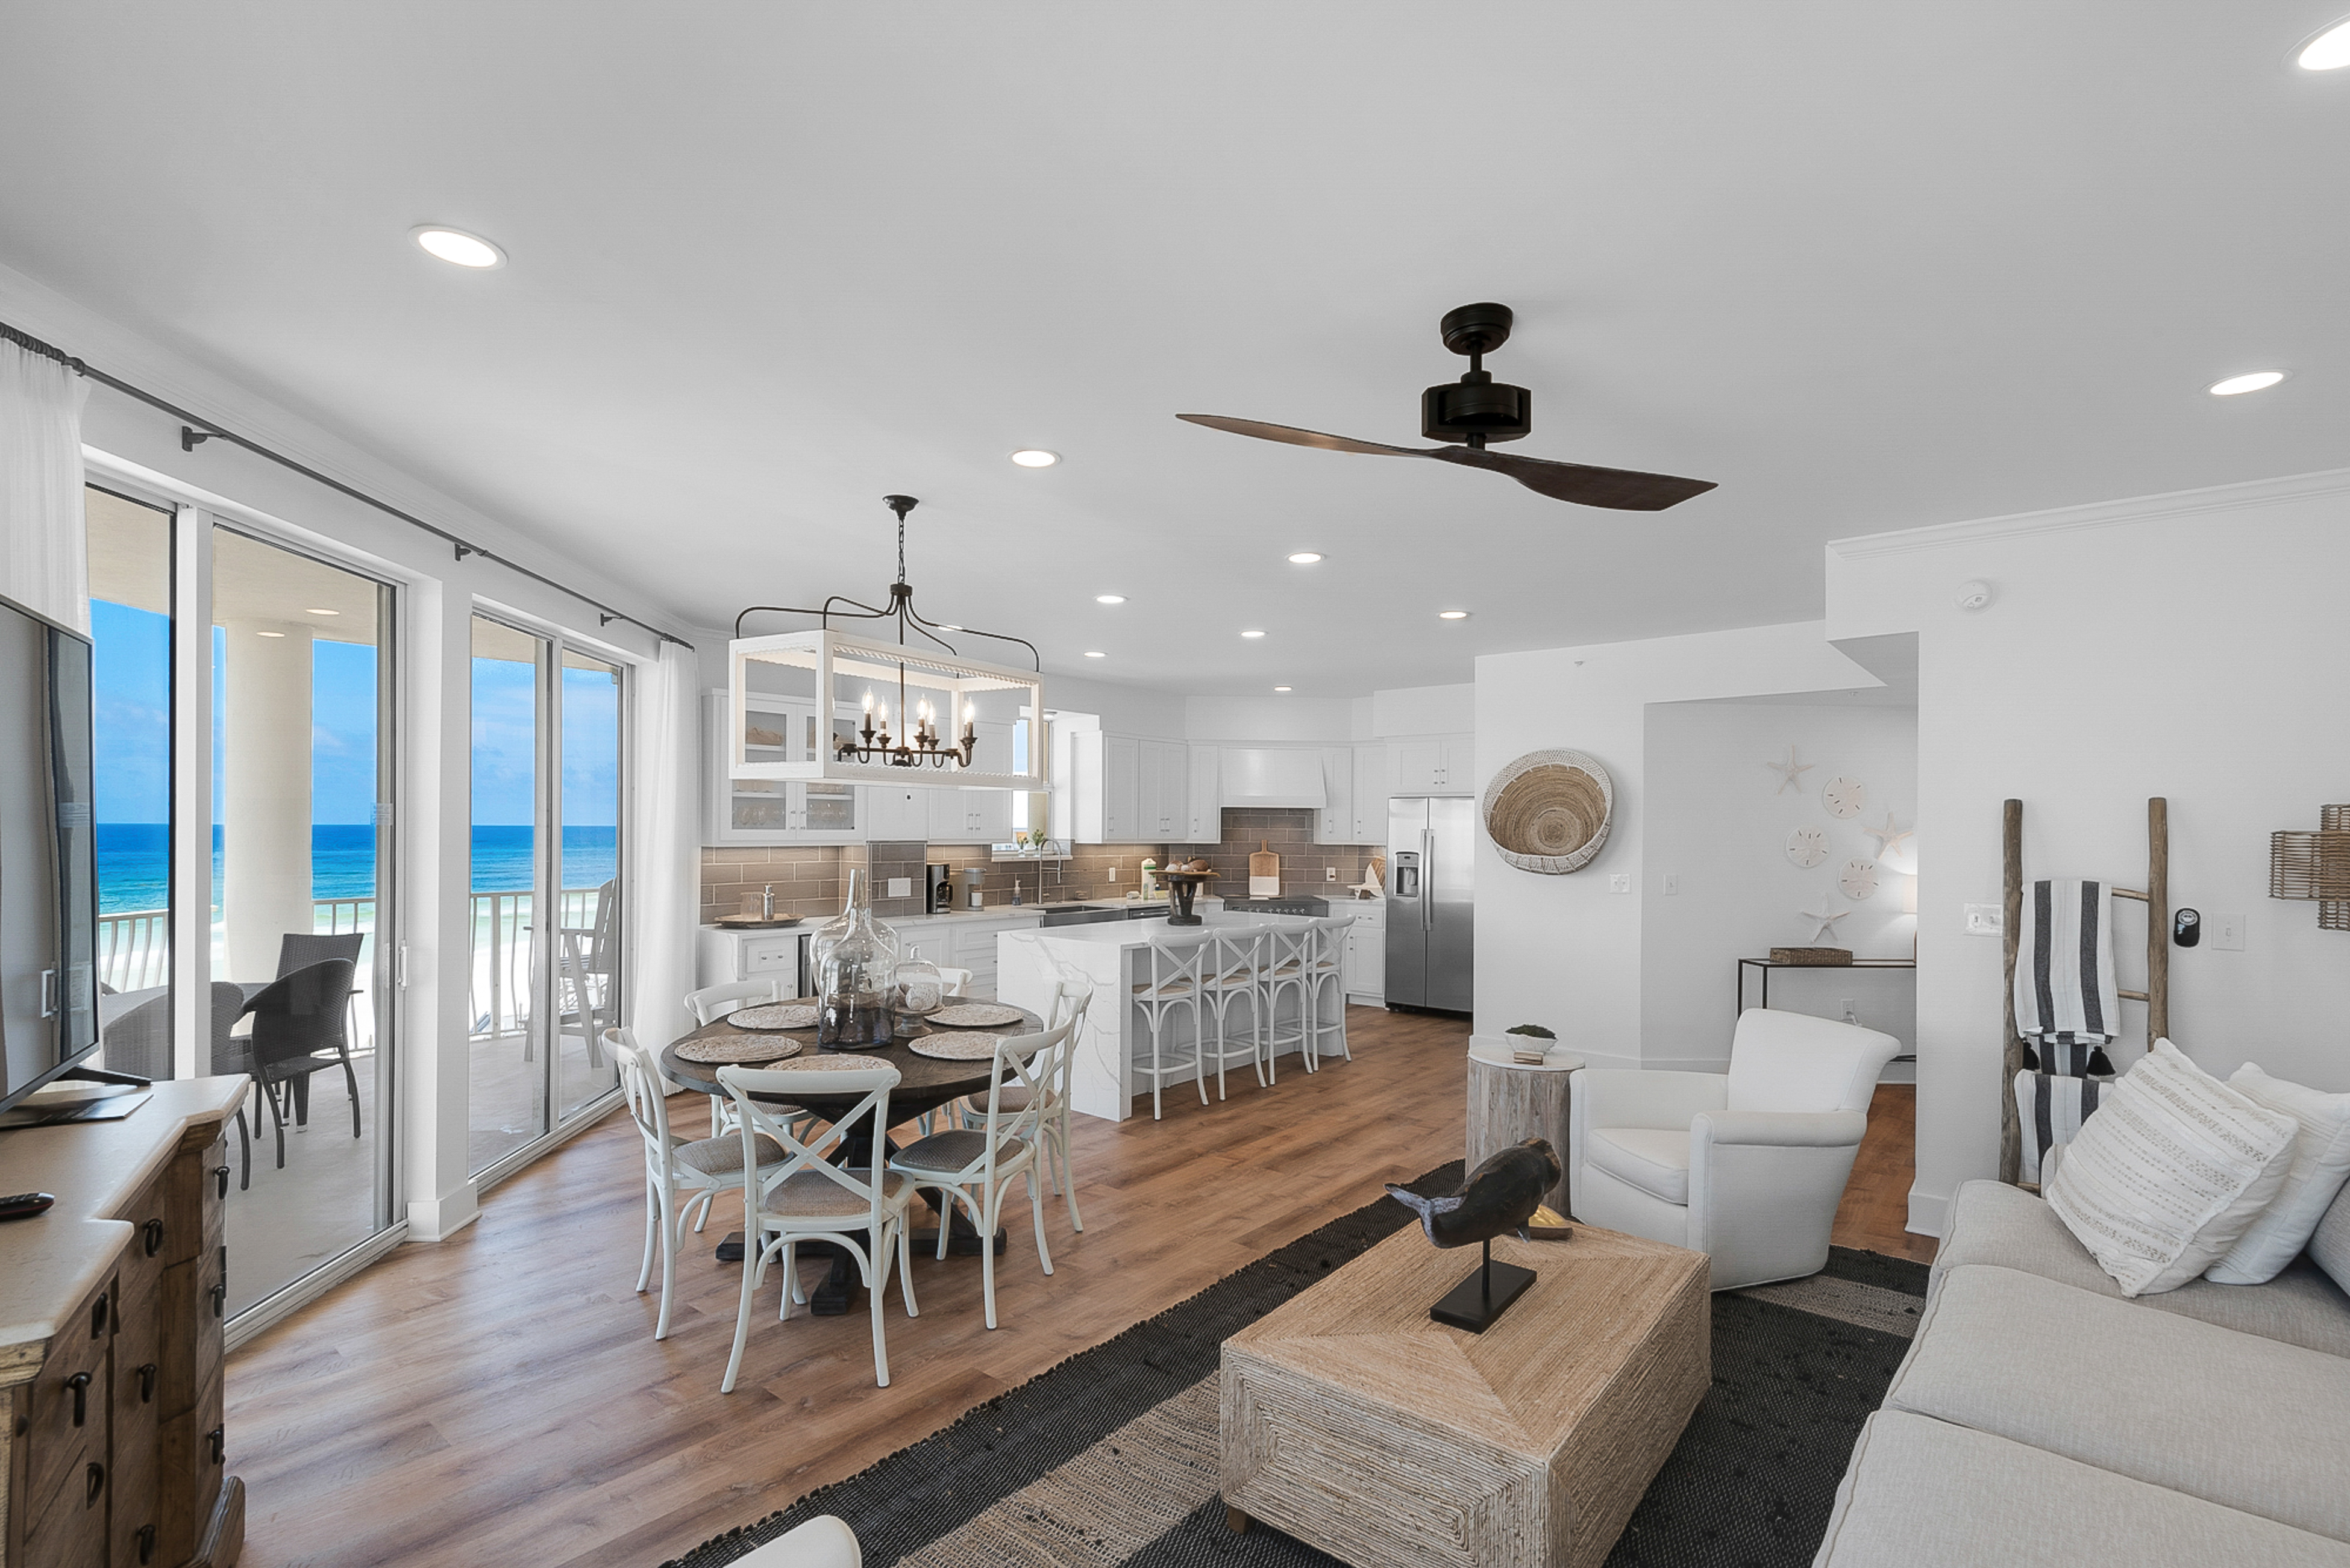 Dunes of Seagrove B305 Condo rental in Dunes of Seagrove in Highway 30-A Florida - #4